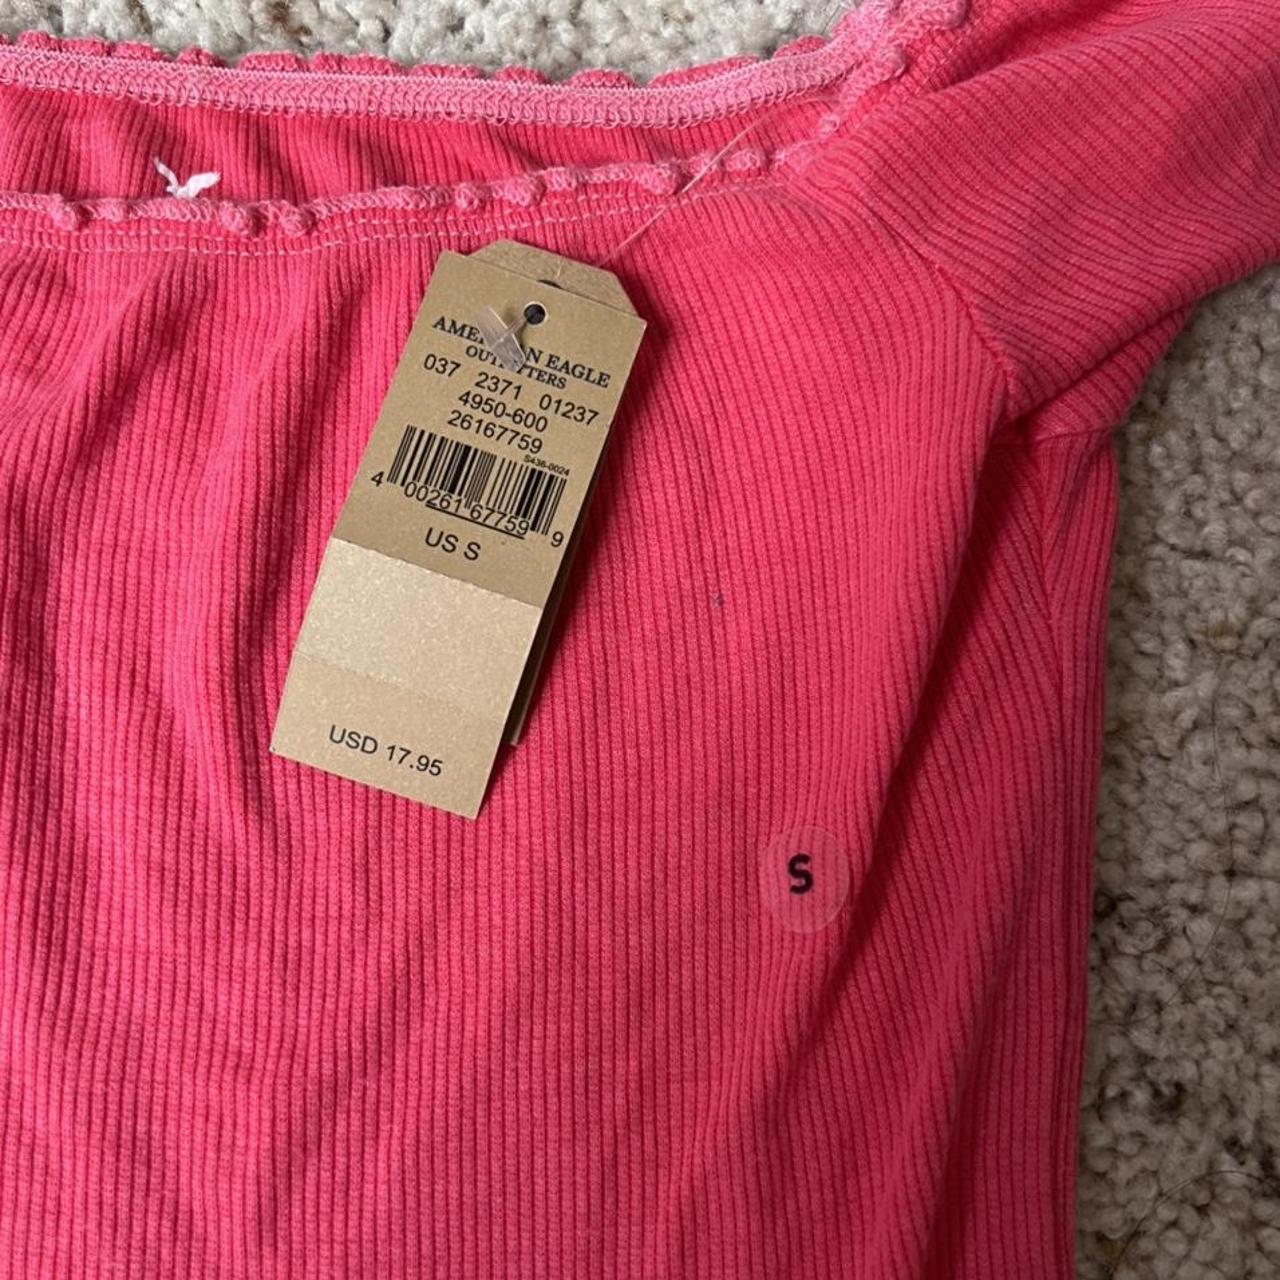 Product Image 3 - American Eagle Outfitters - pink